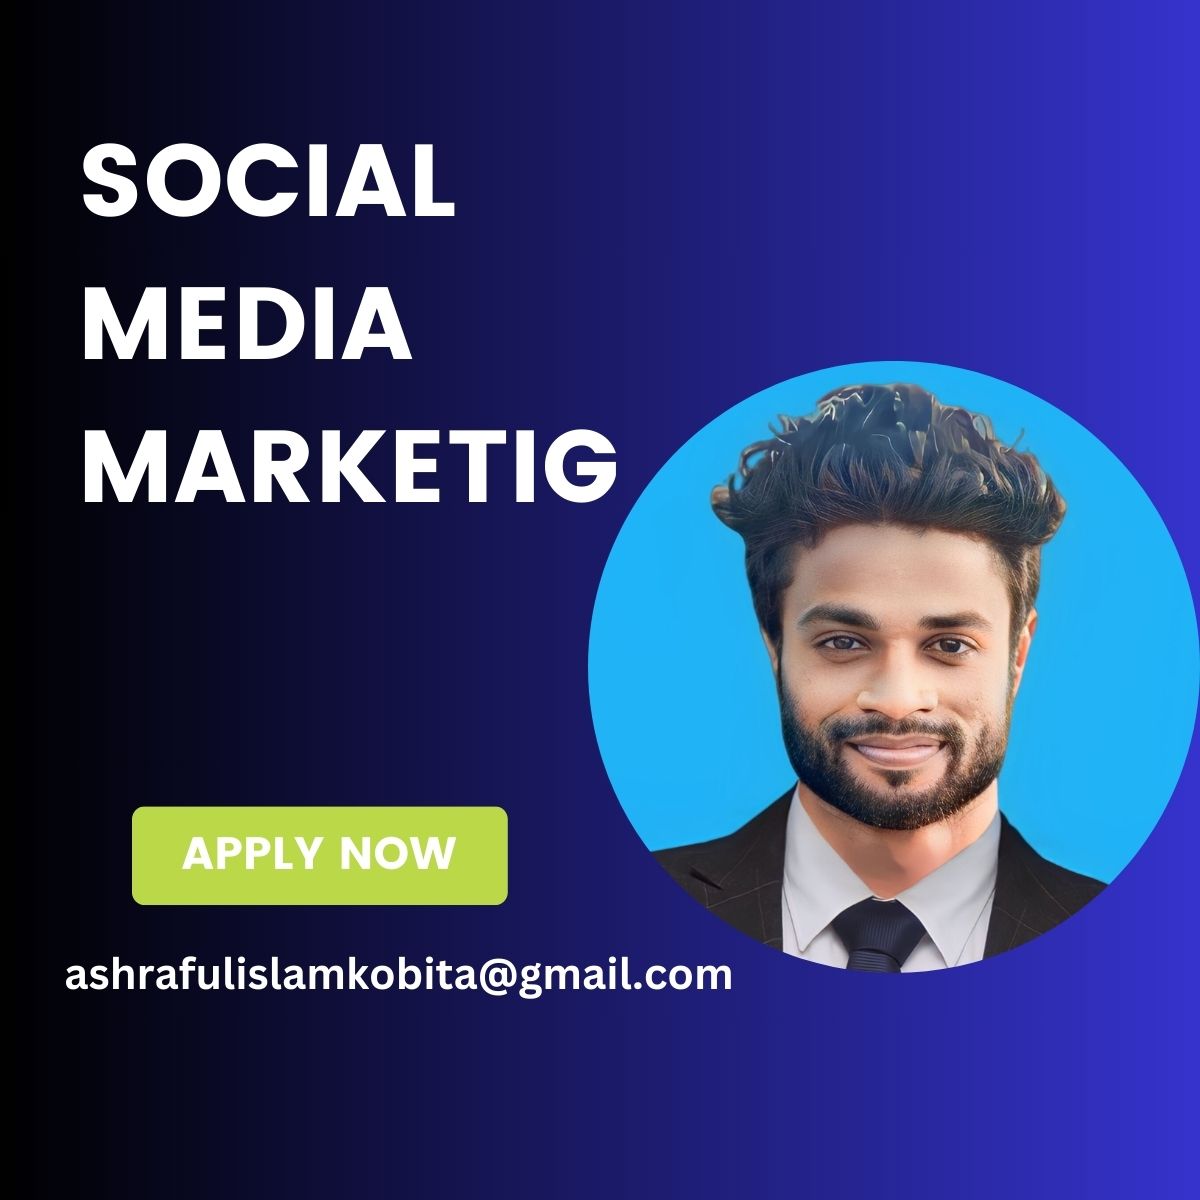 Hi  I am a Digital Marketer expert-and specializes in social media marketing. My With over a decade of experience in digital marketing, I use various techniques to increase targeted traffic to online businesses and websites.
#socialmediamarketing 
#socialmediamanager